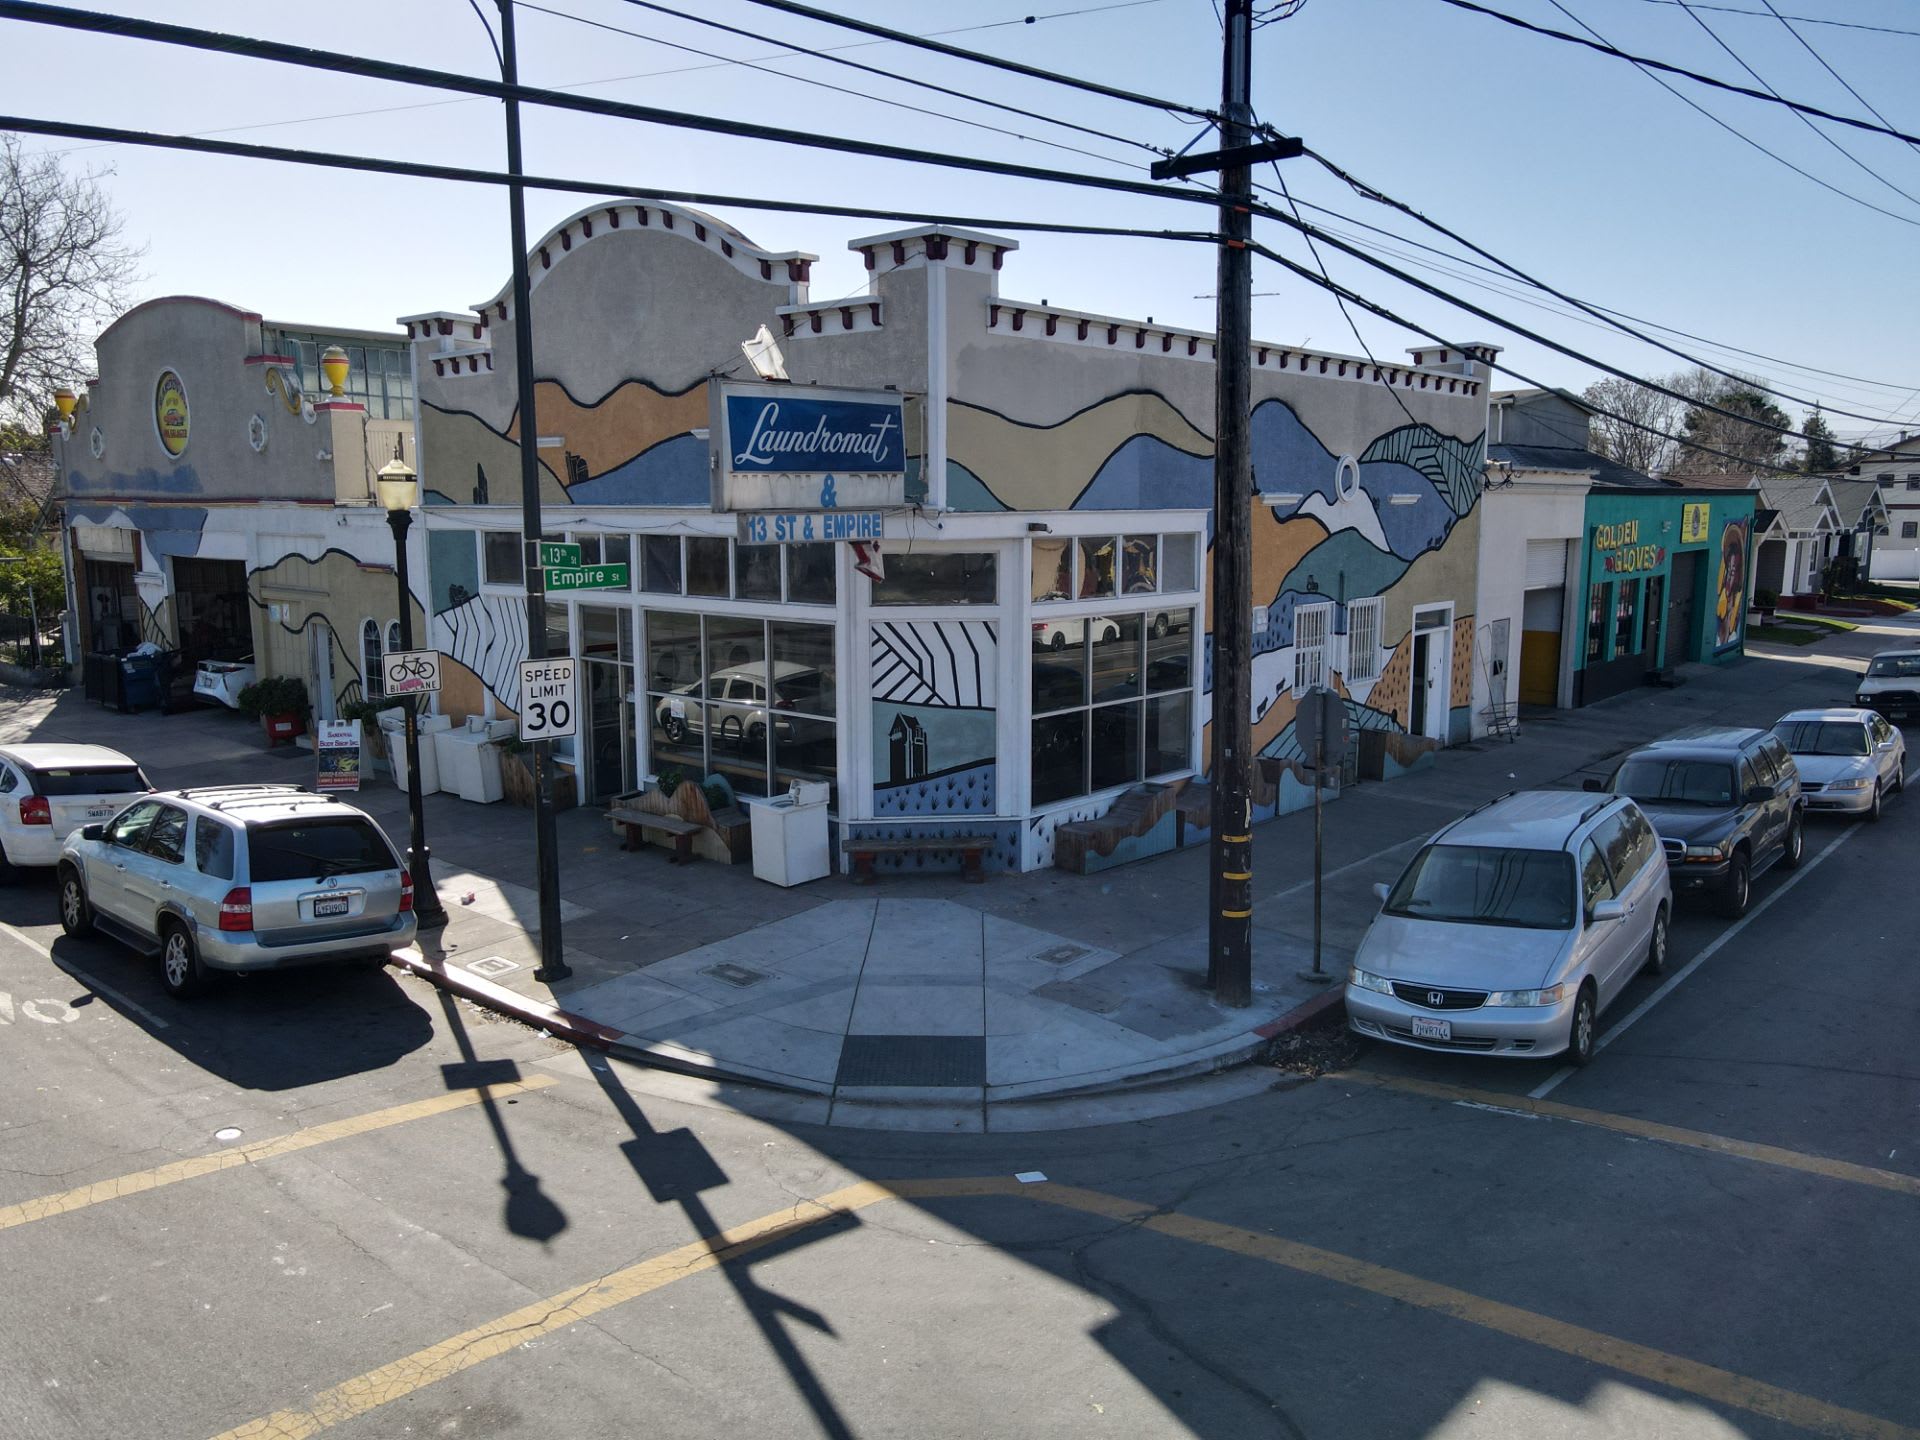 9K SF Multi-Tenant Retail Building Sold to Owner User